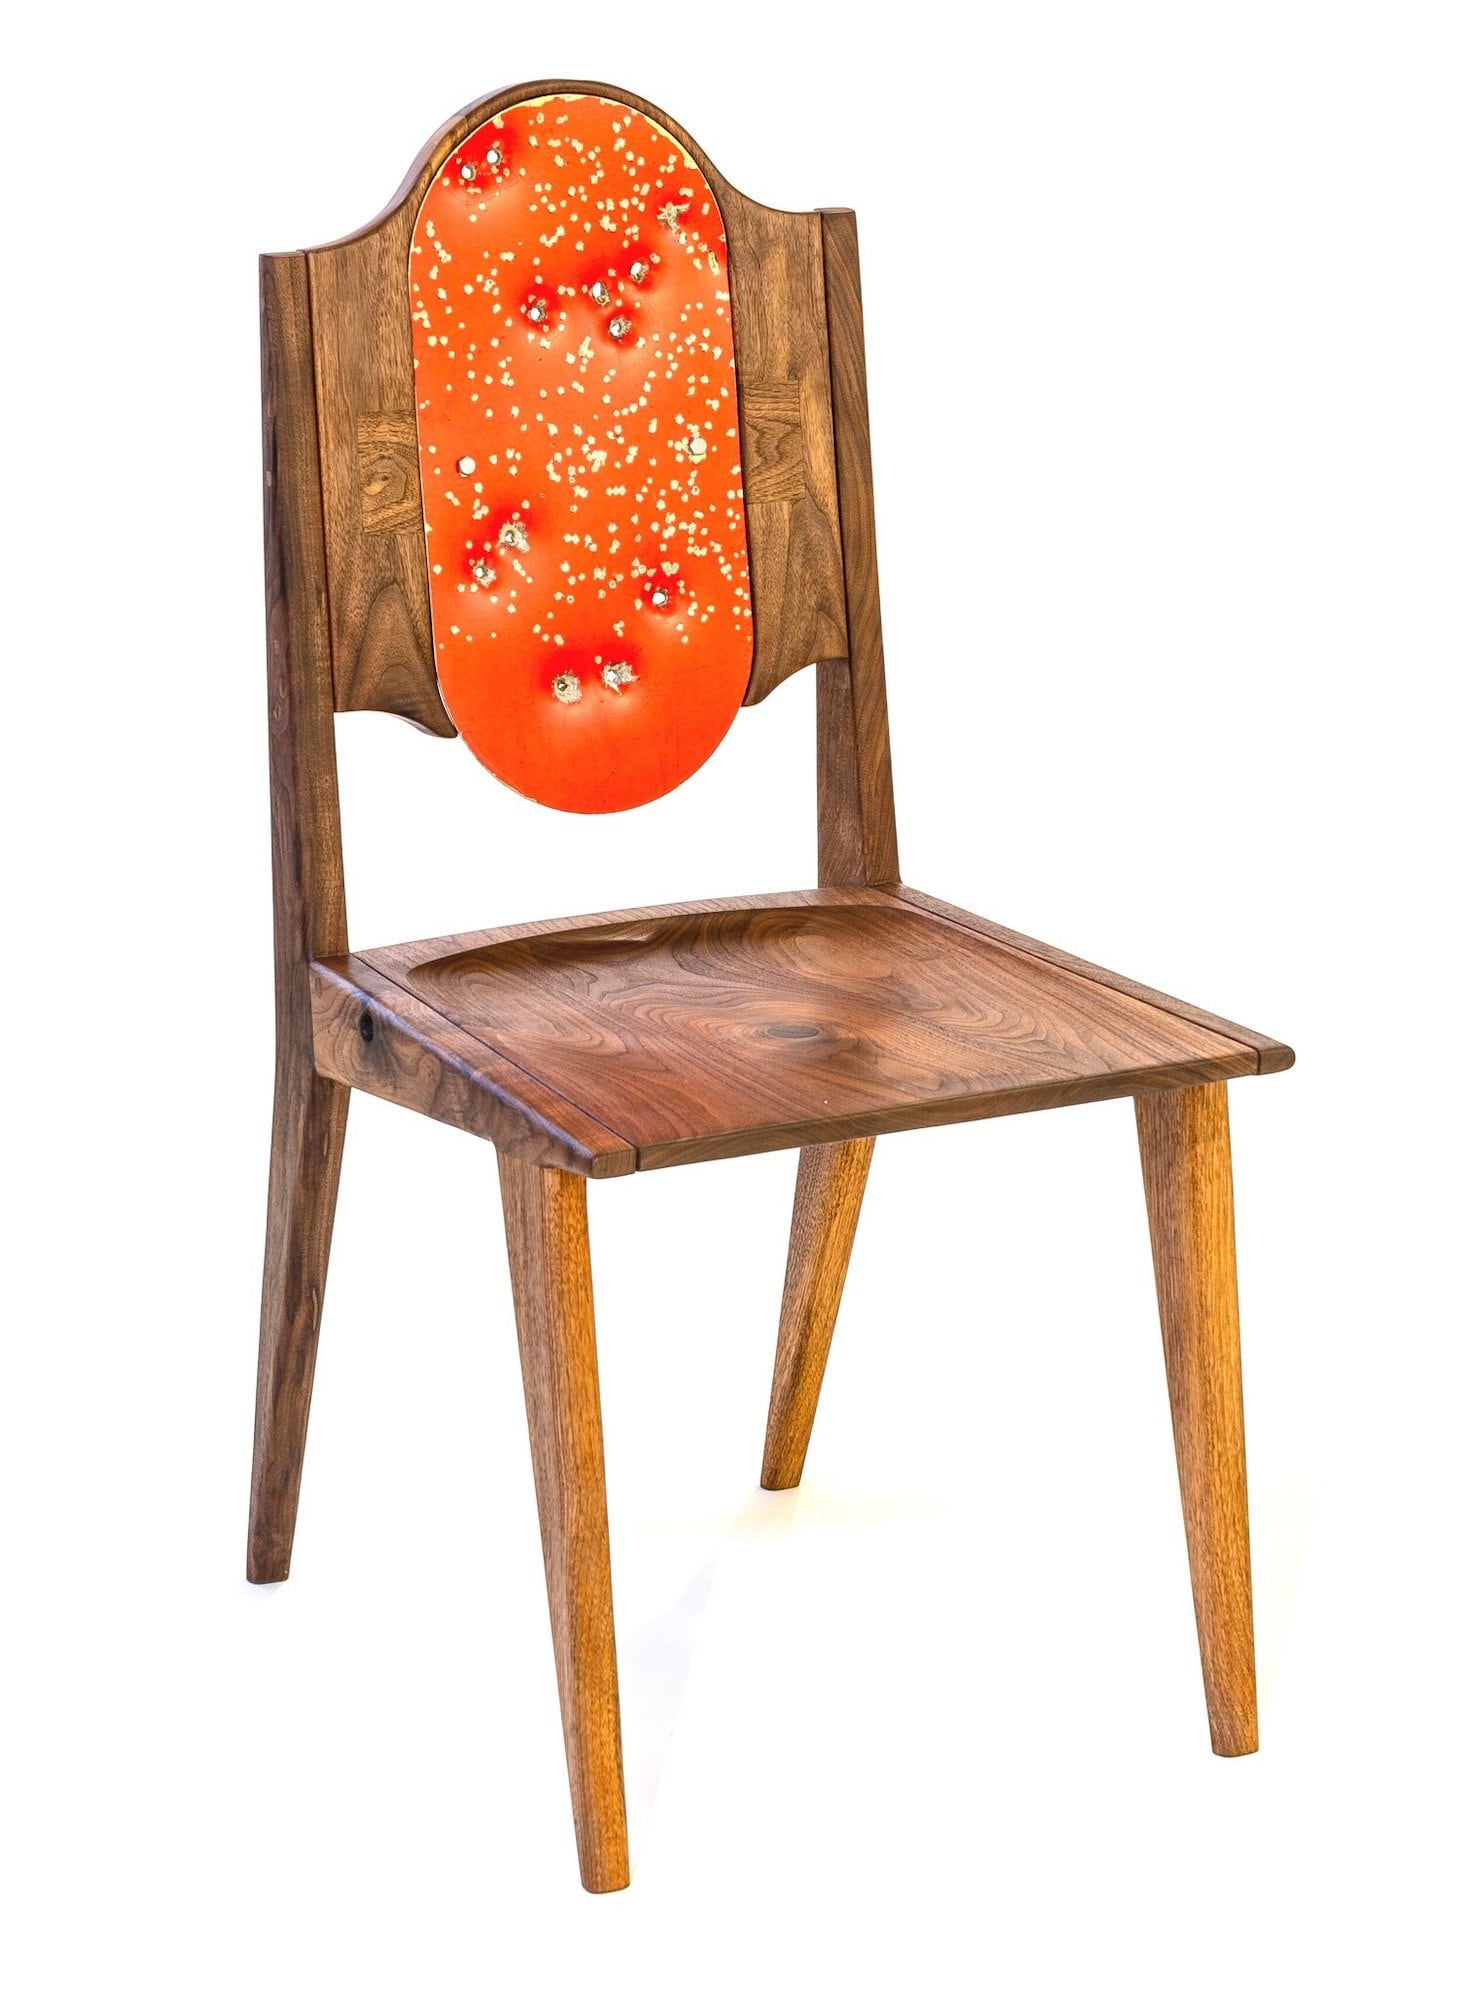 Chair with wood and recycled metal by Lauren Verdugo